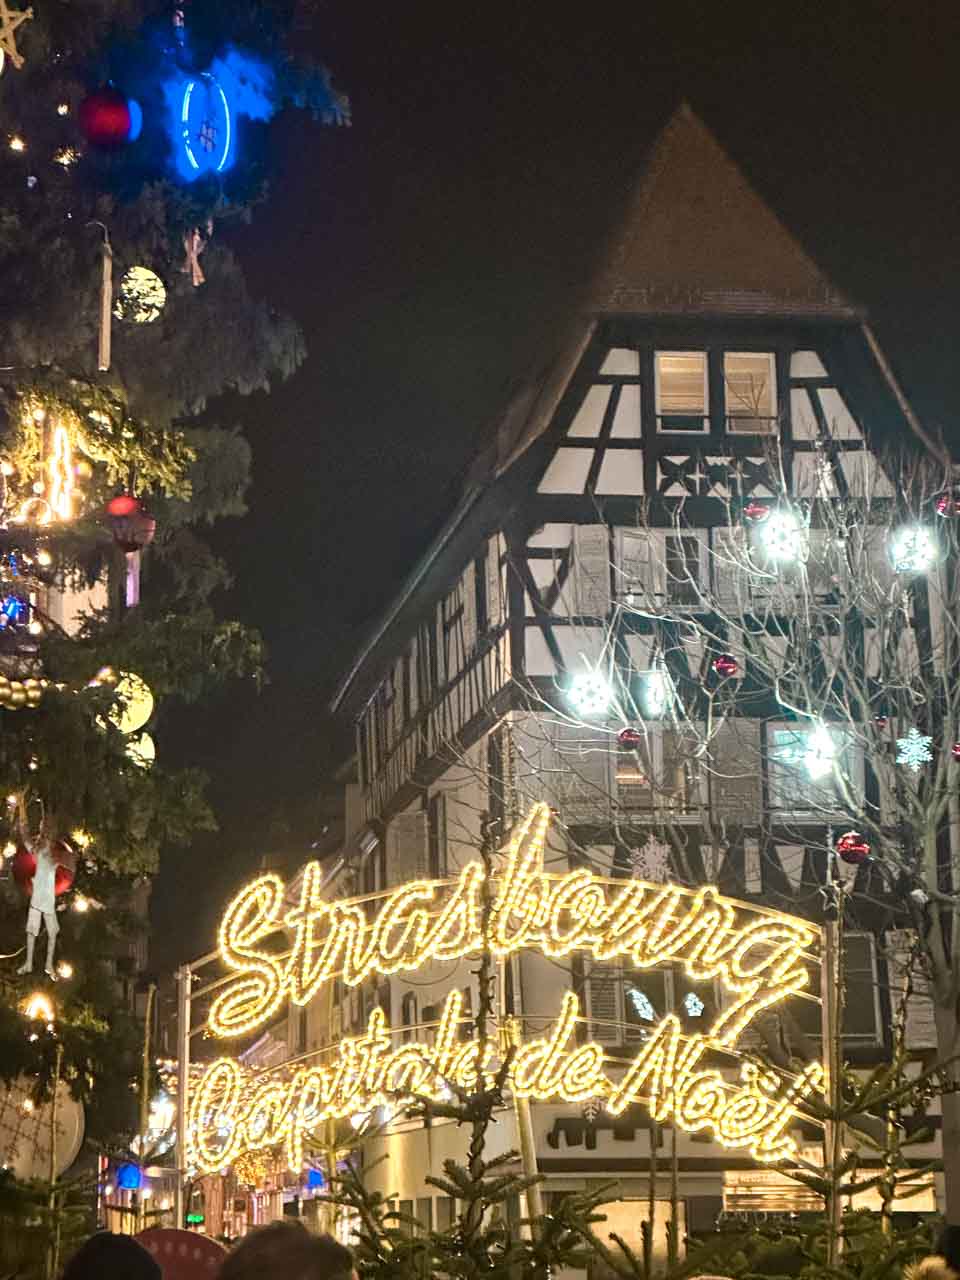 A sign that reads "Strasbourg Capitale de Noël" in bright lights with a traditional half-timbered building in the background